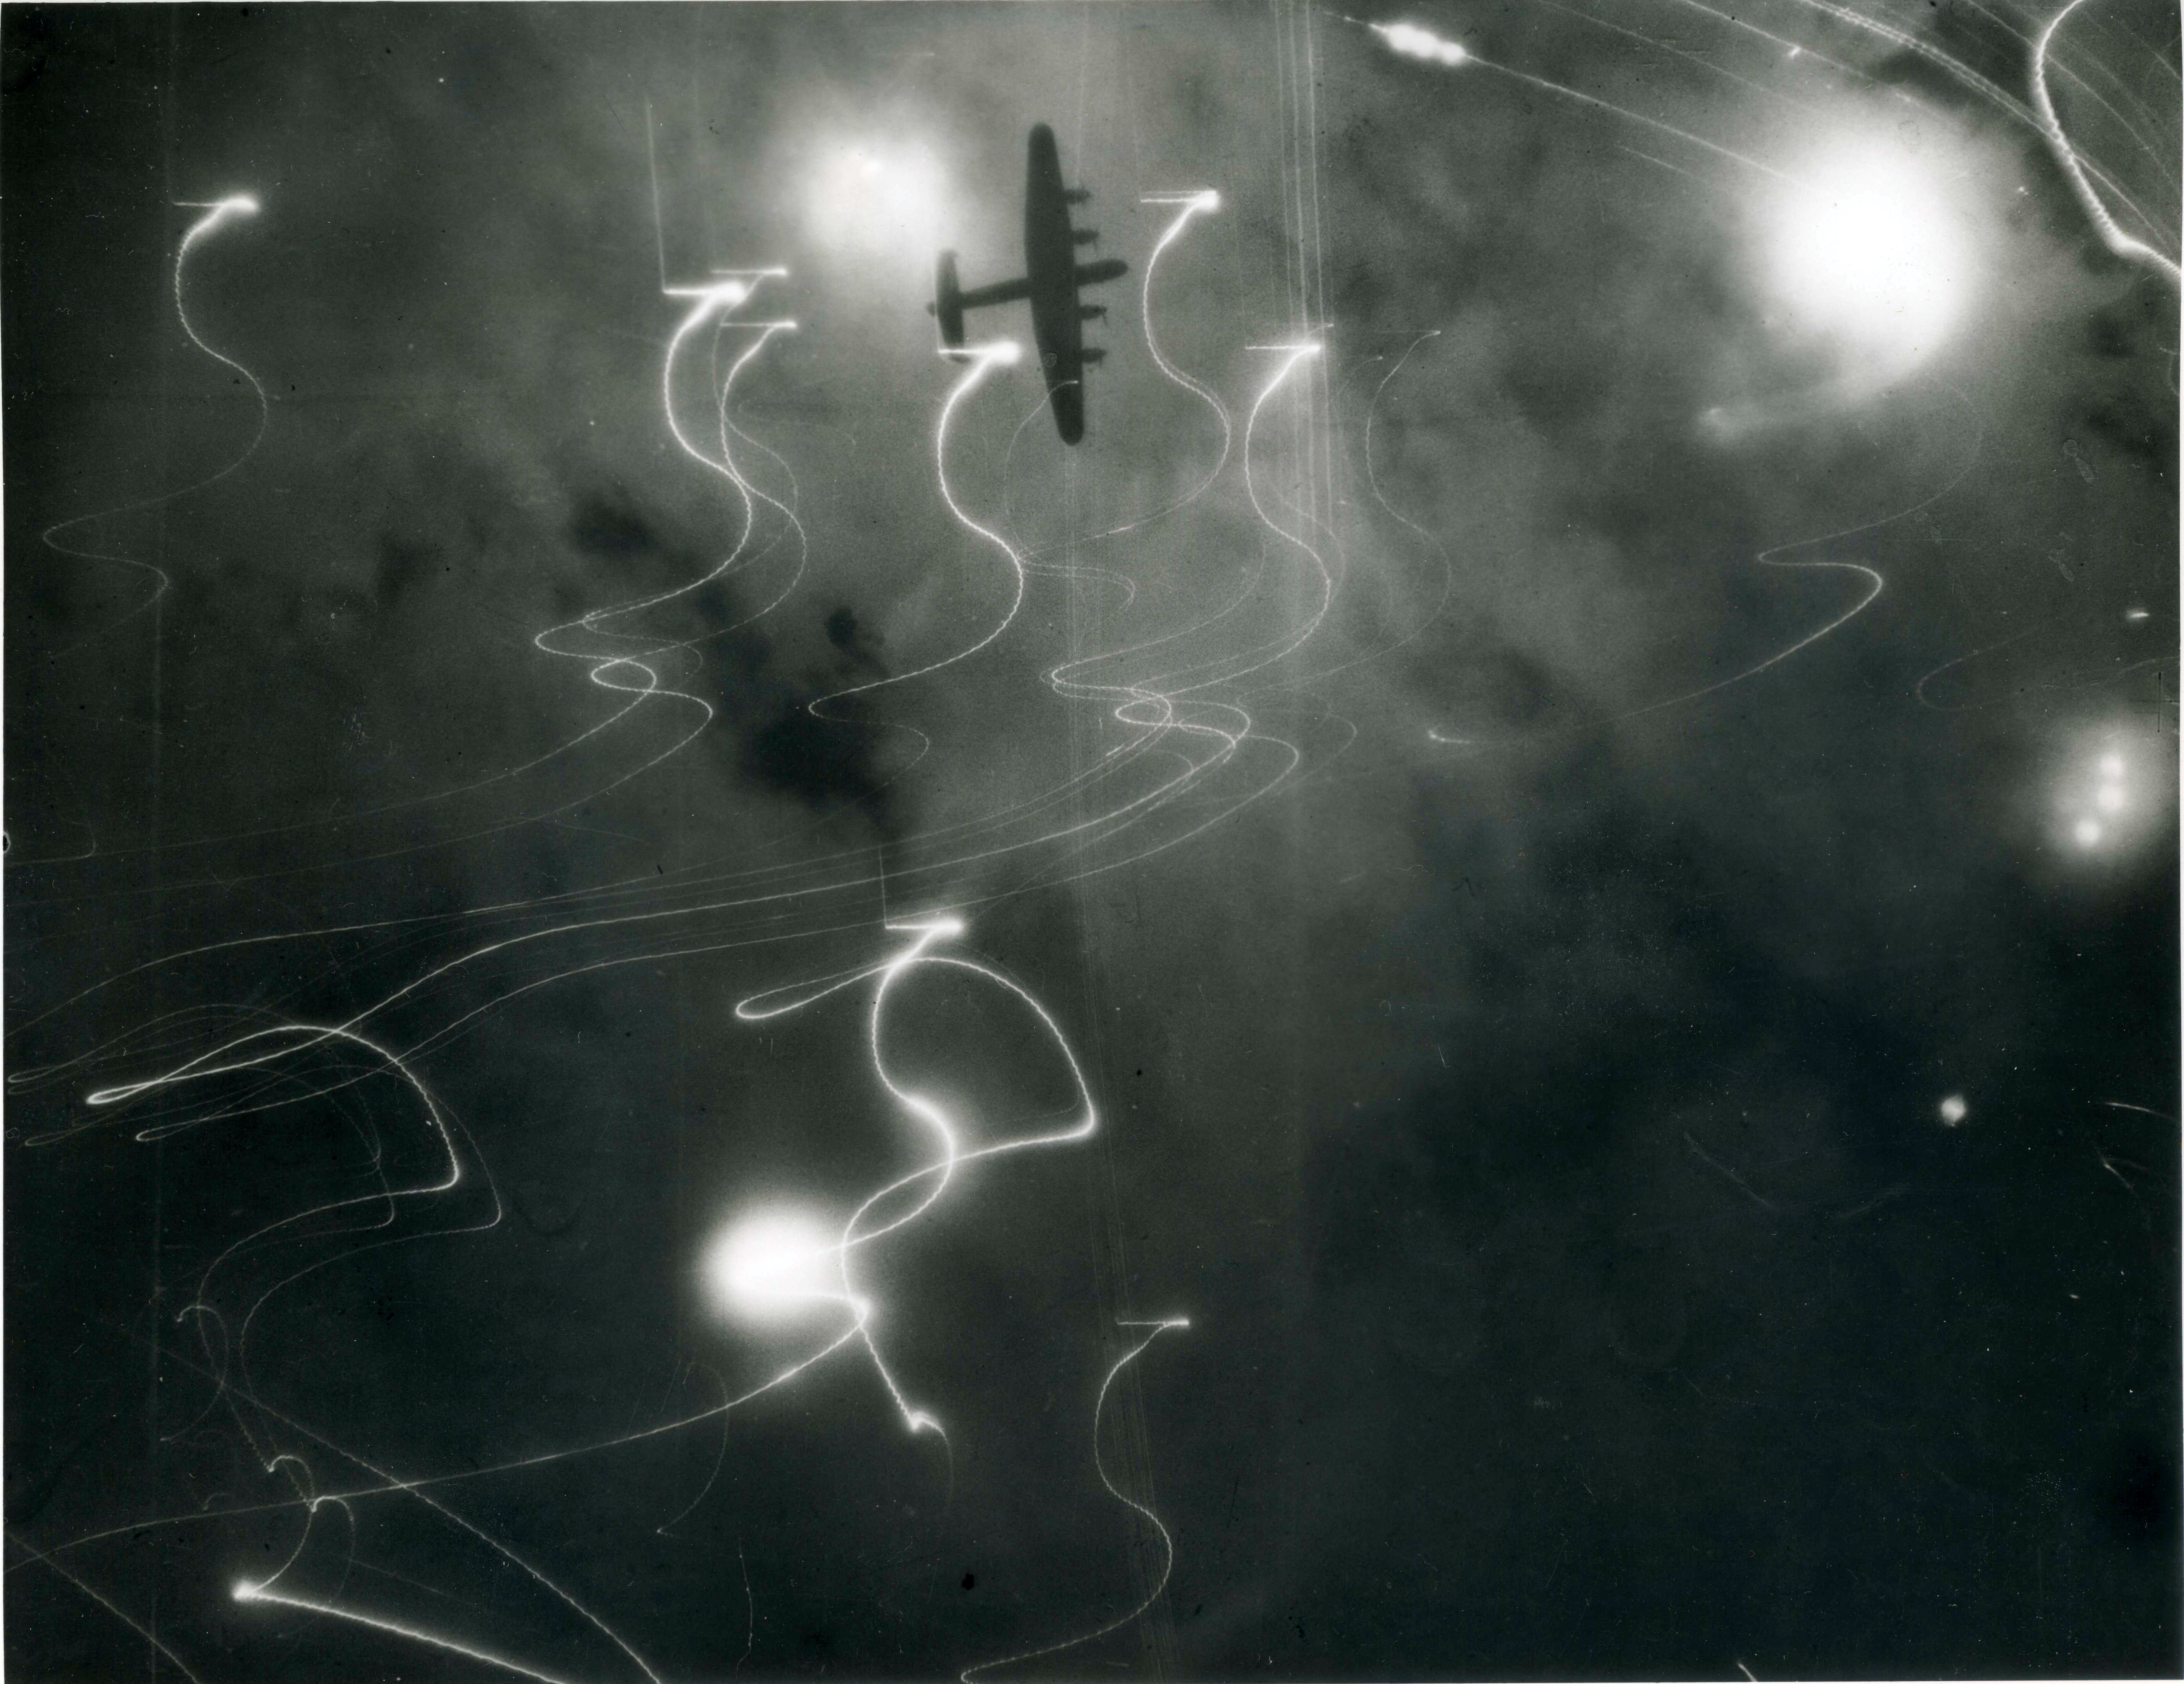 An Avro Lancaster of No 1 Group, Bomber Command, silhouetted against flares, smoke and explosions during the attack on Hamburg, Germany, by aircraft of Nos 1, 5 and 8 Groups on the night of 30/31 January 1943. This raid was the first occasion on which H2S centimetric radar was used by the Pathfinder aircraft to navigate the force to the target. Credit: Imperial War Museum